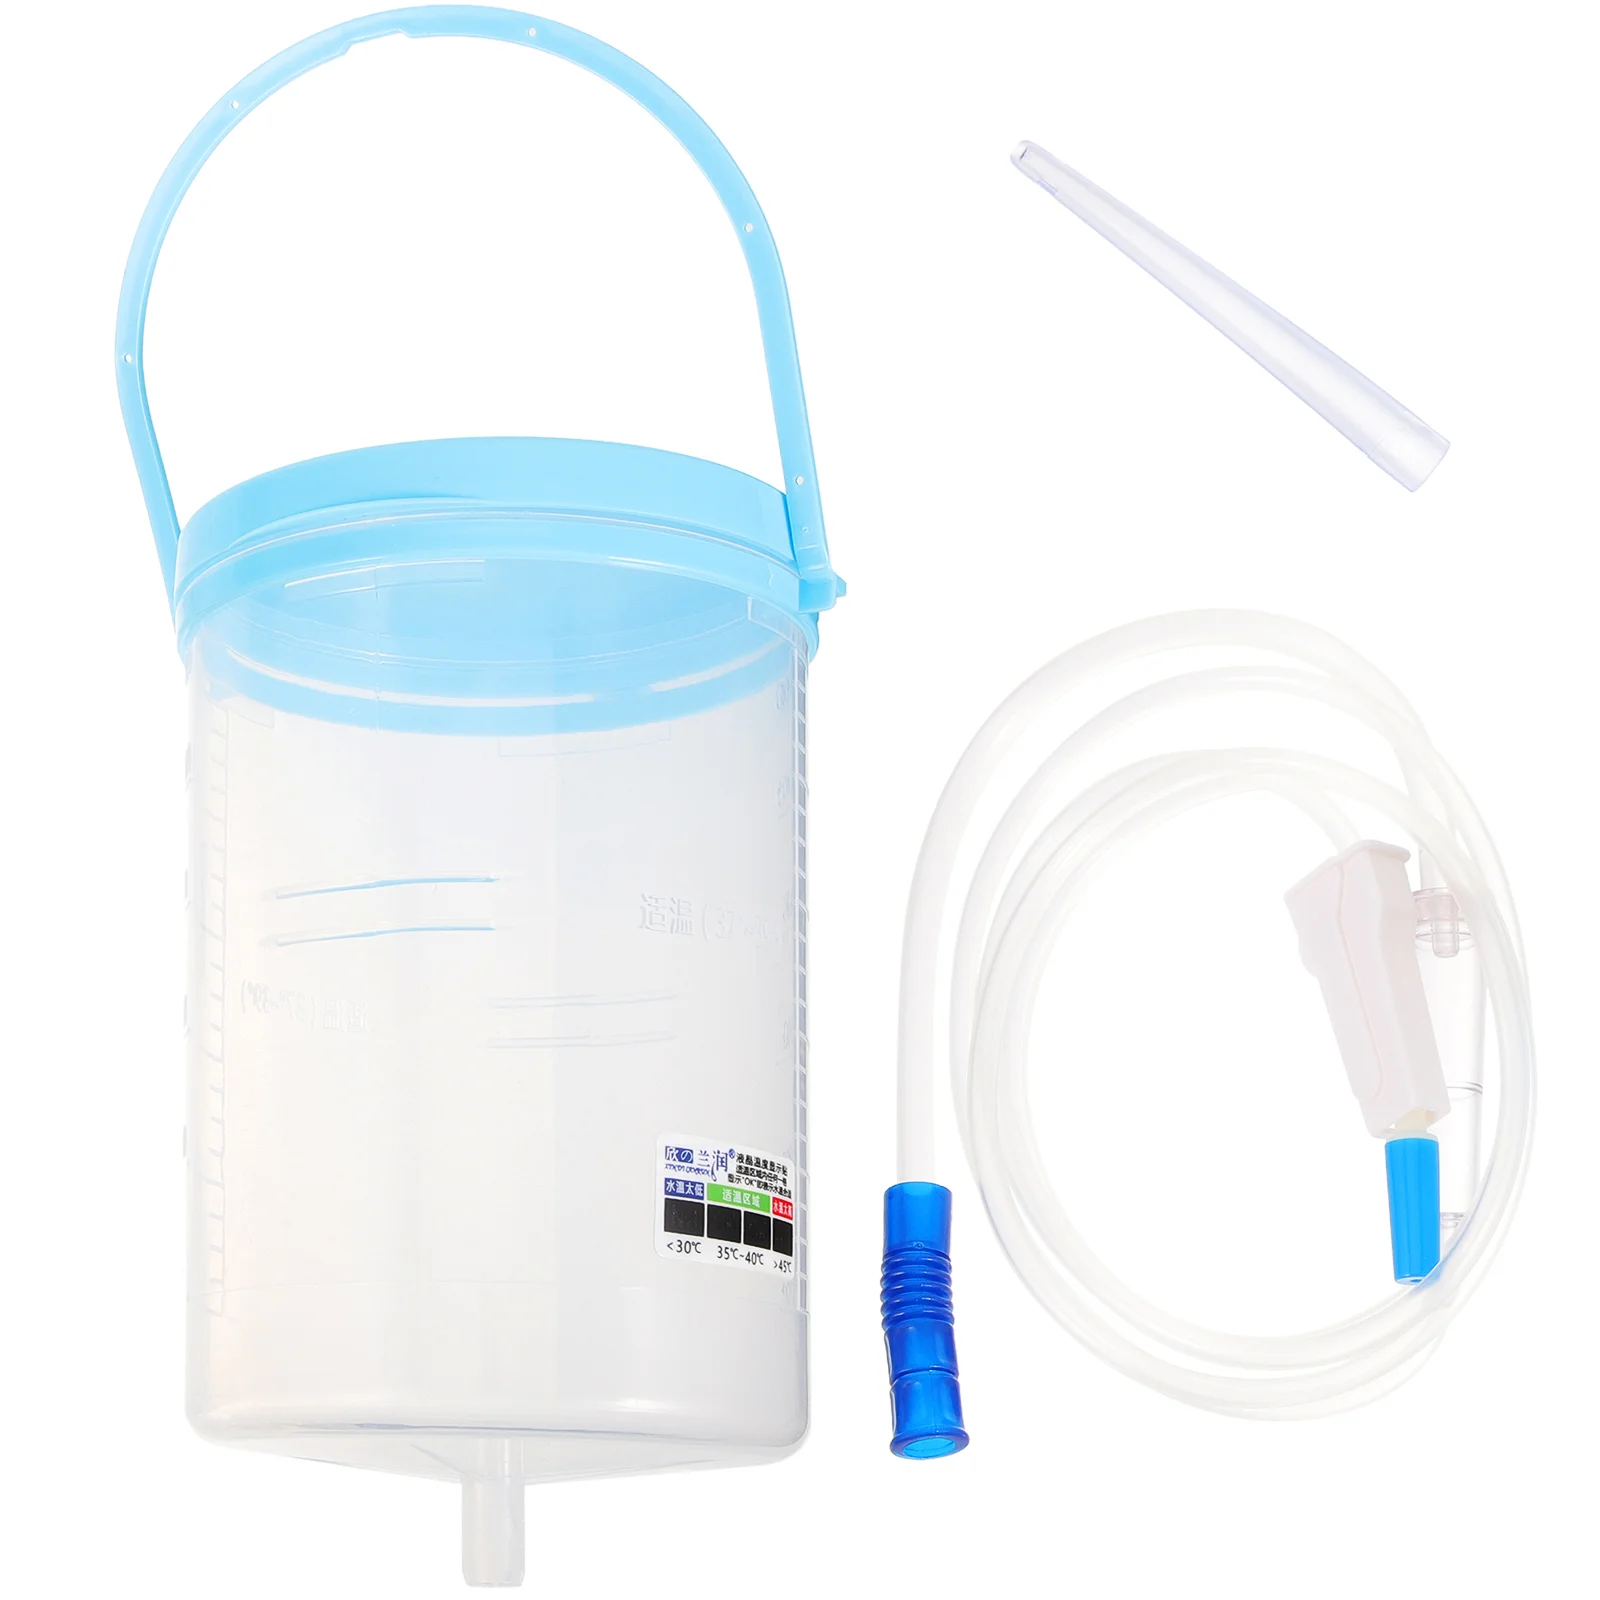 

Enema Bucket Coffee Accessories Reusable Cleaning Kit Convenient Tool Plastic Douche Anal Cleaner